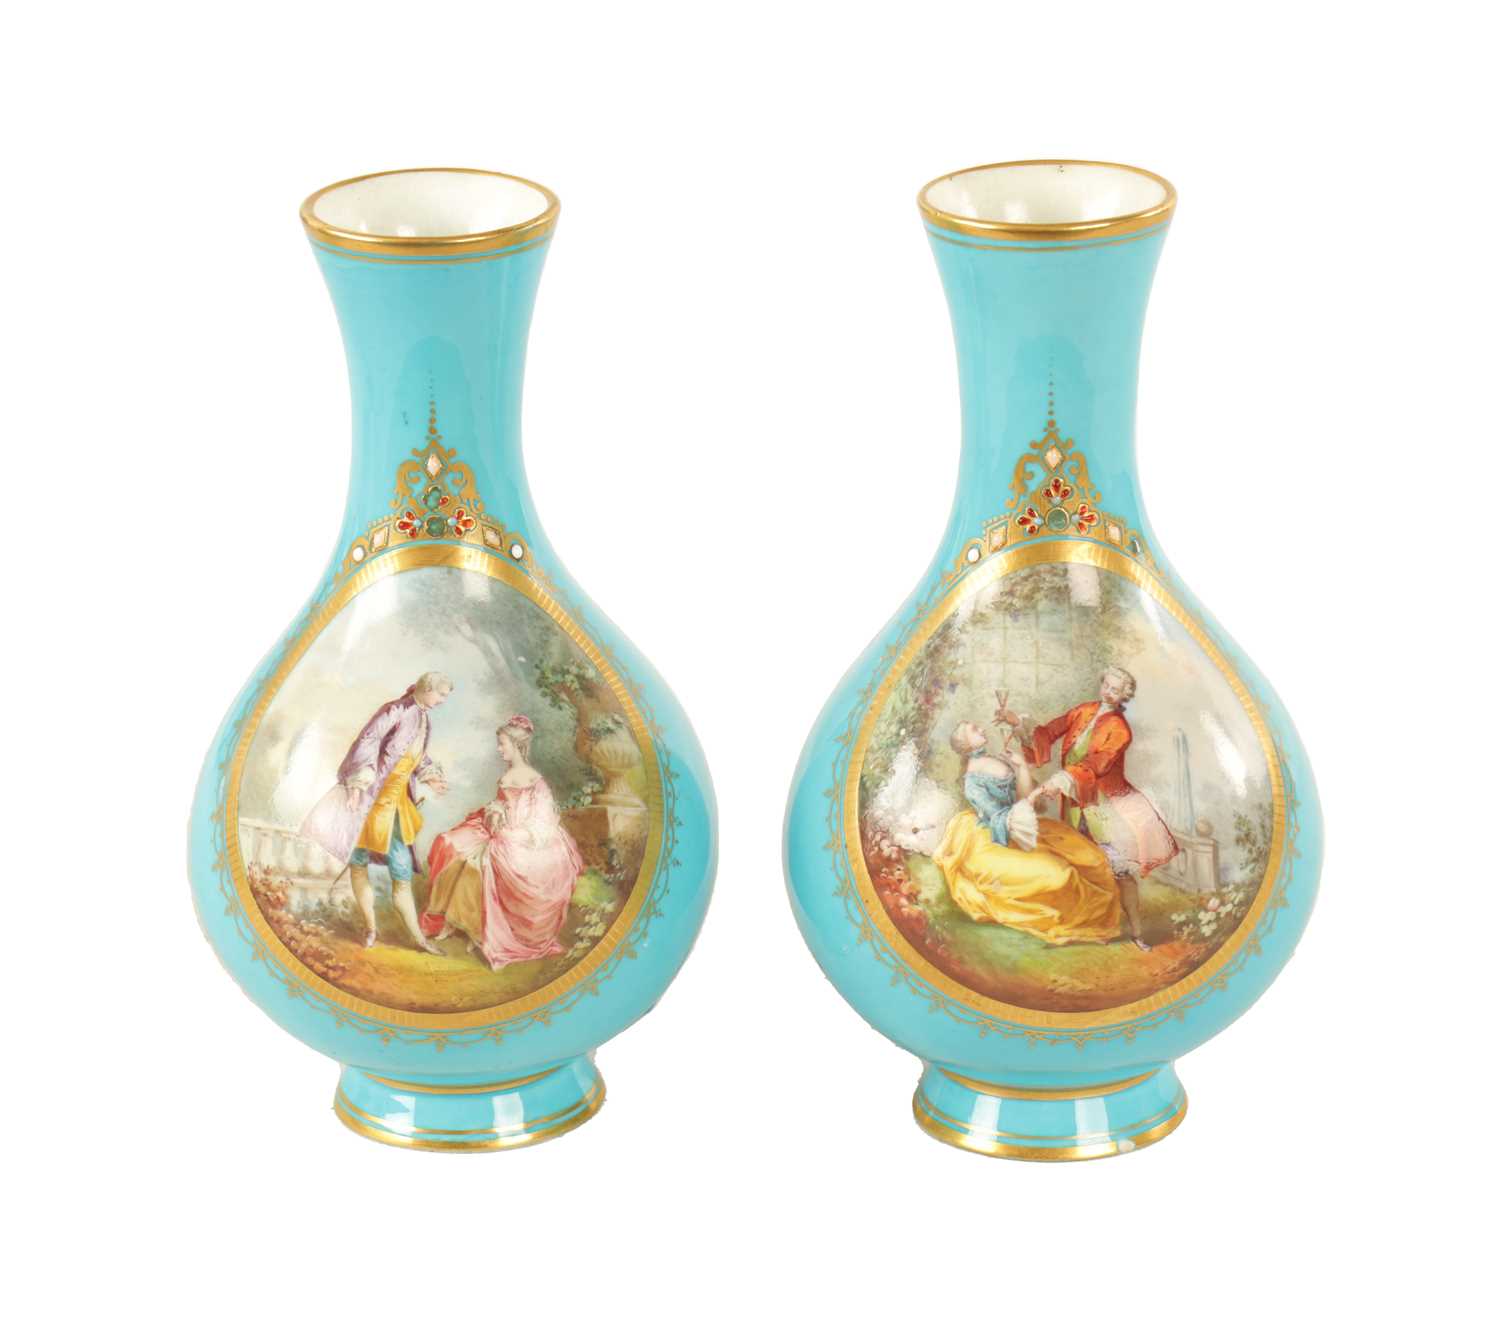 A PAIR OF 19TH CENTURY FRENCH SERVES PORCELAIN VASES